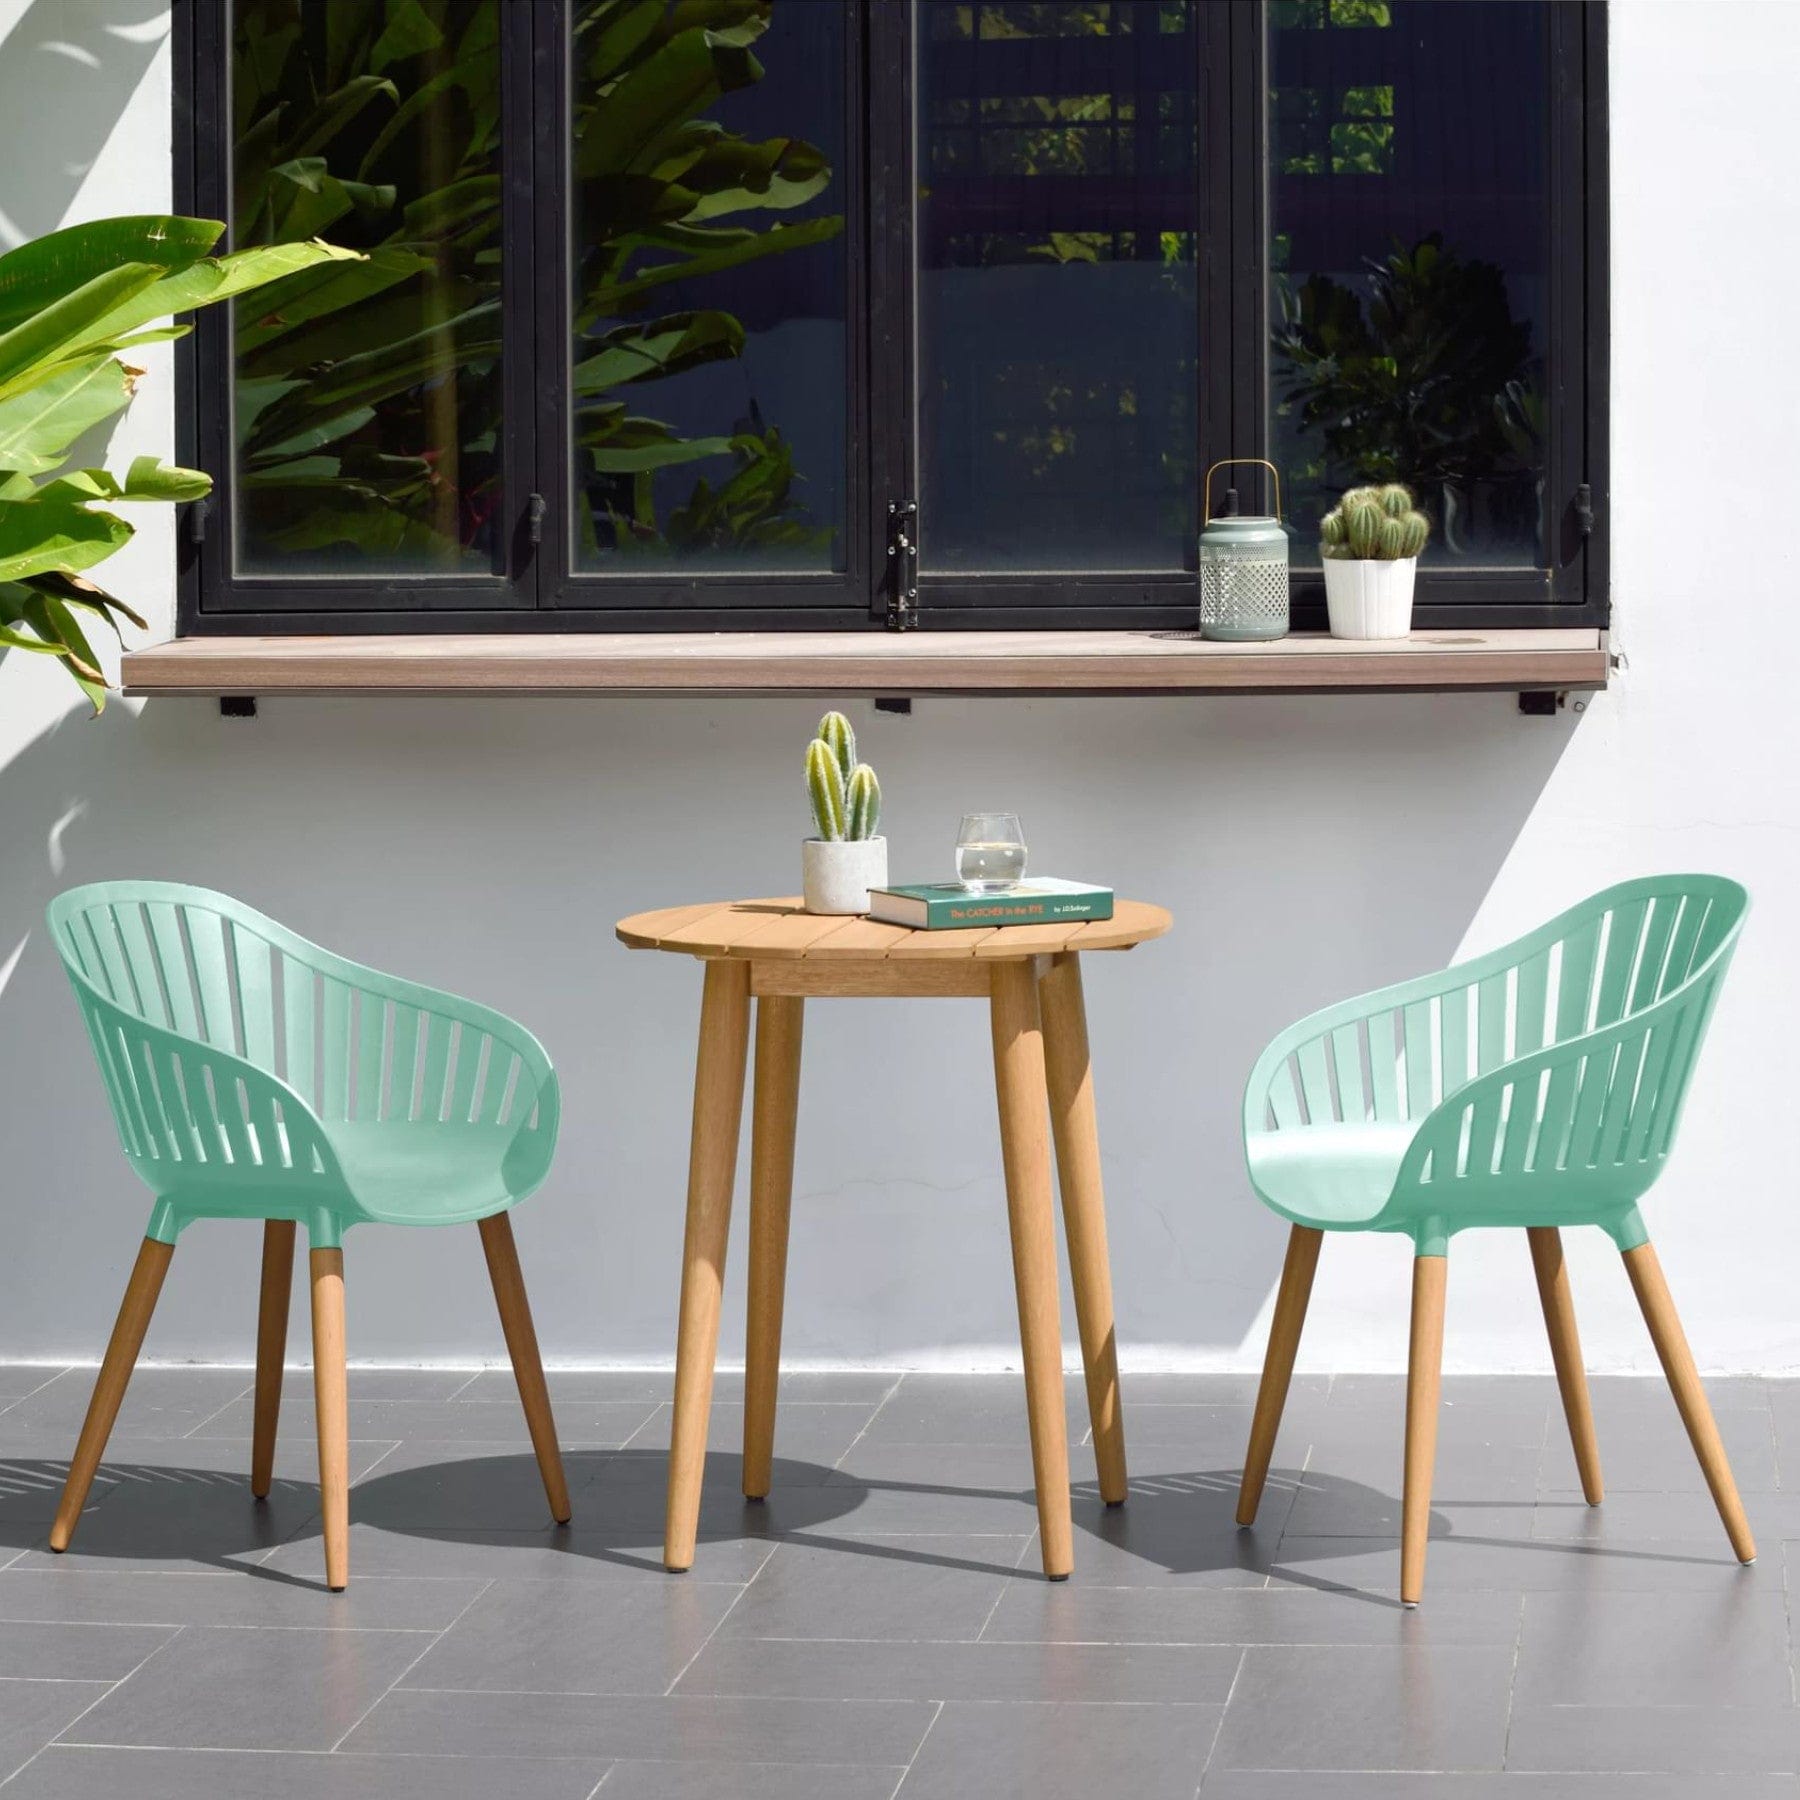 Outdoor patio setup with a round wooden table, two mint green modern chairs, potted cacti, open window, and lush greenery in a tranquil home garden.